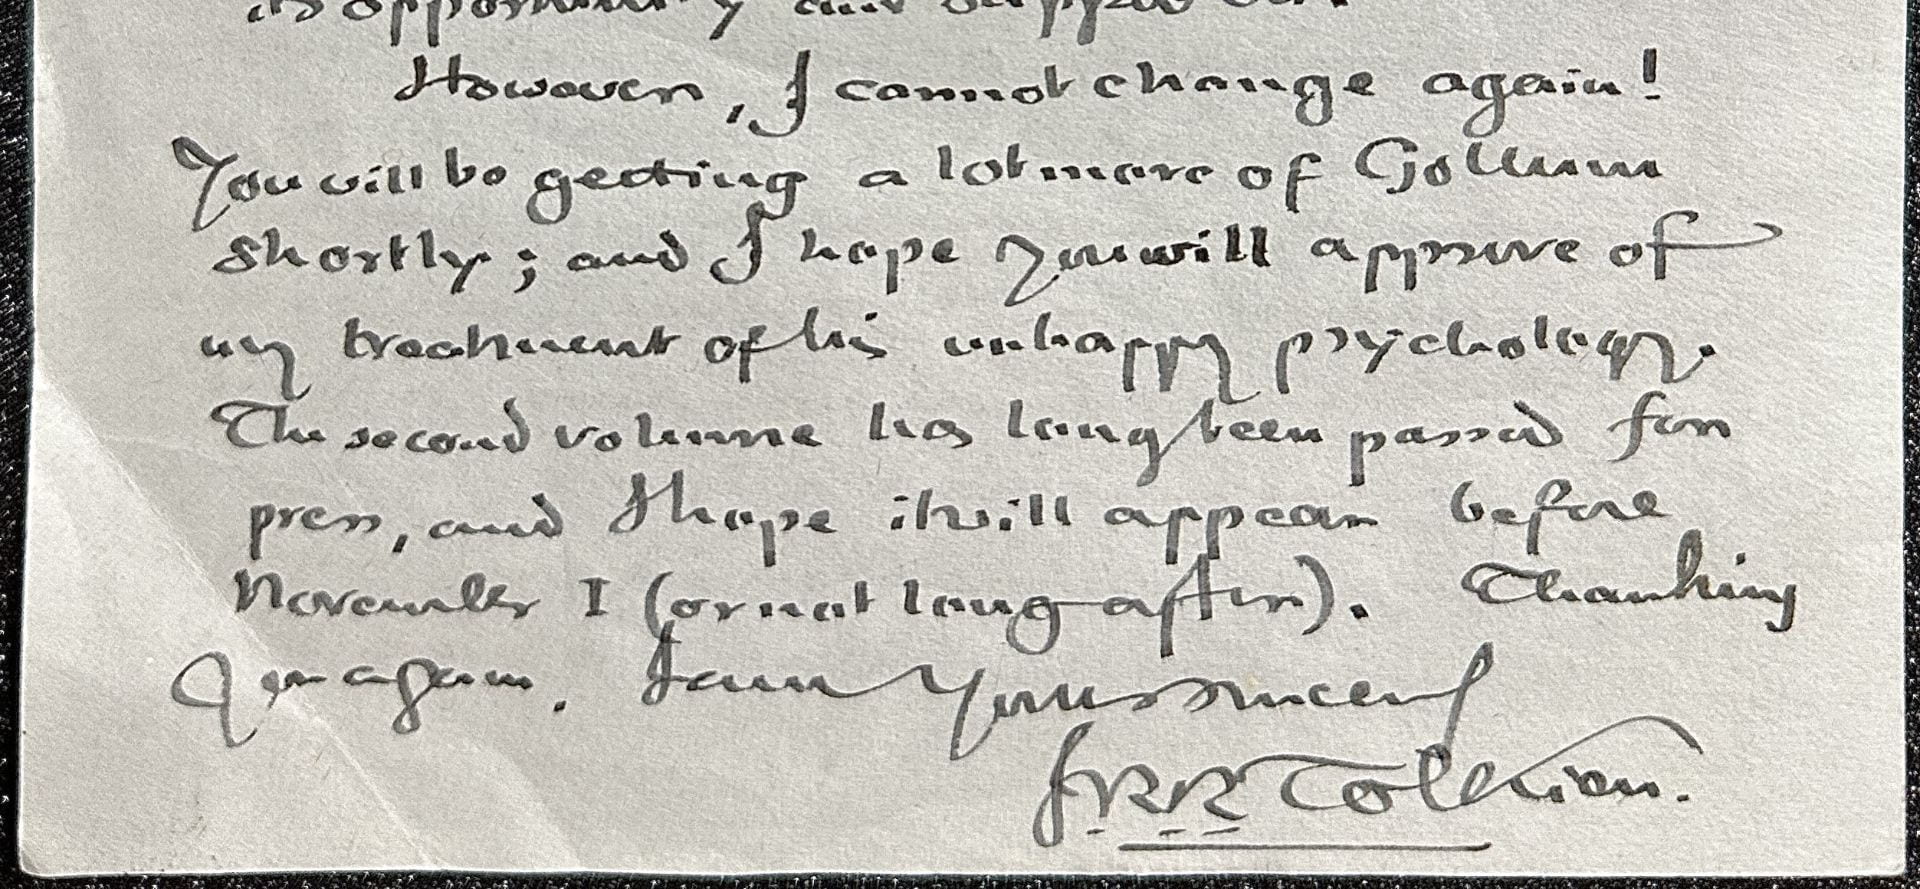 Image of part of a letter that reads: "However, I cannot change again! You will be getting a lot more of Gollum shortly; and I hope you will approve of my treatment of his unhappy psychology. The second volume has long been passed for pres, and I hope it will appear before November 1 (or not long after). Thanking you again, I am Yours Sincerely, J.R.R. Tolkien."